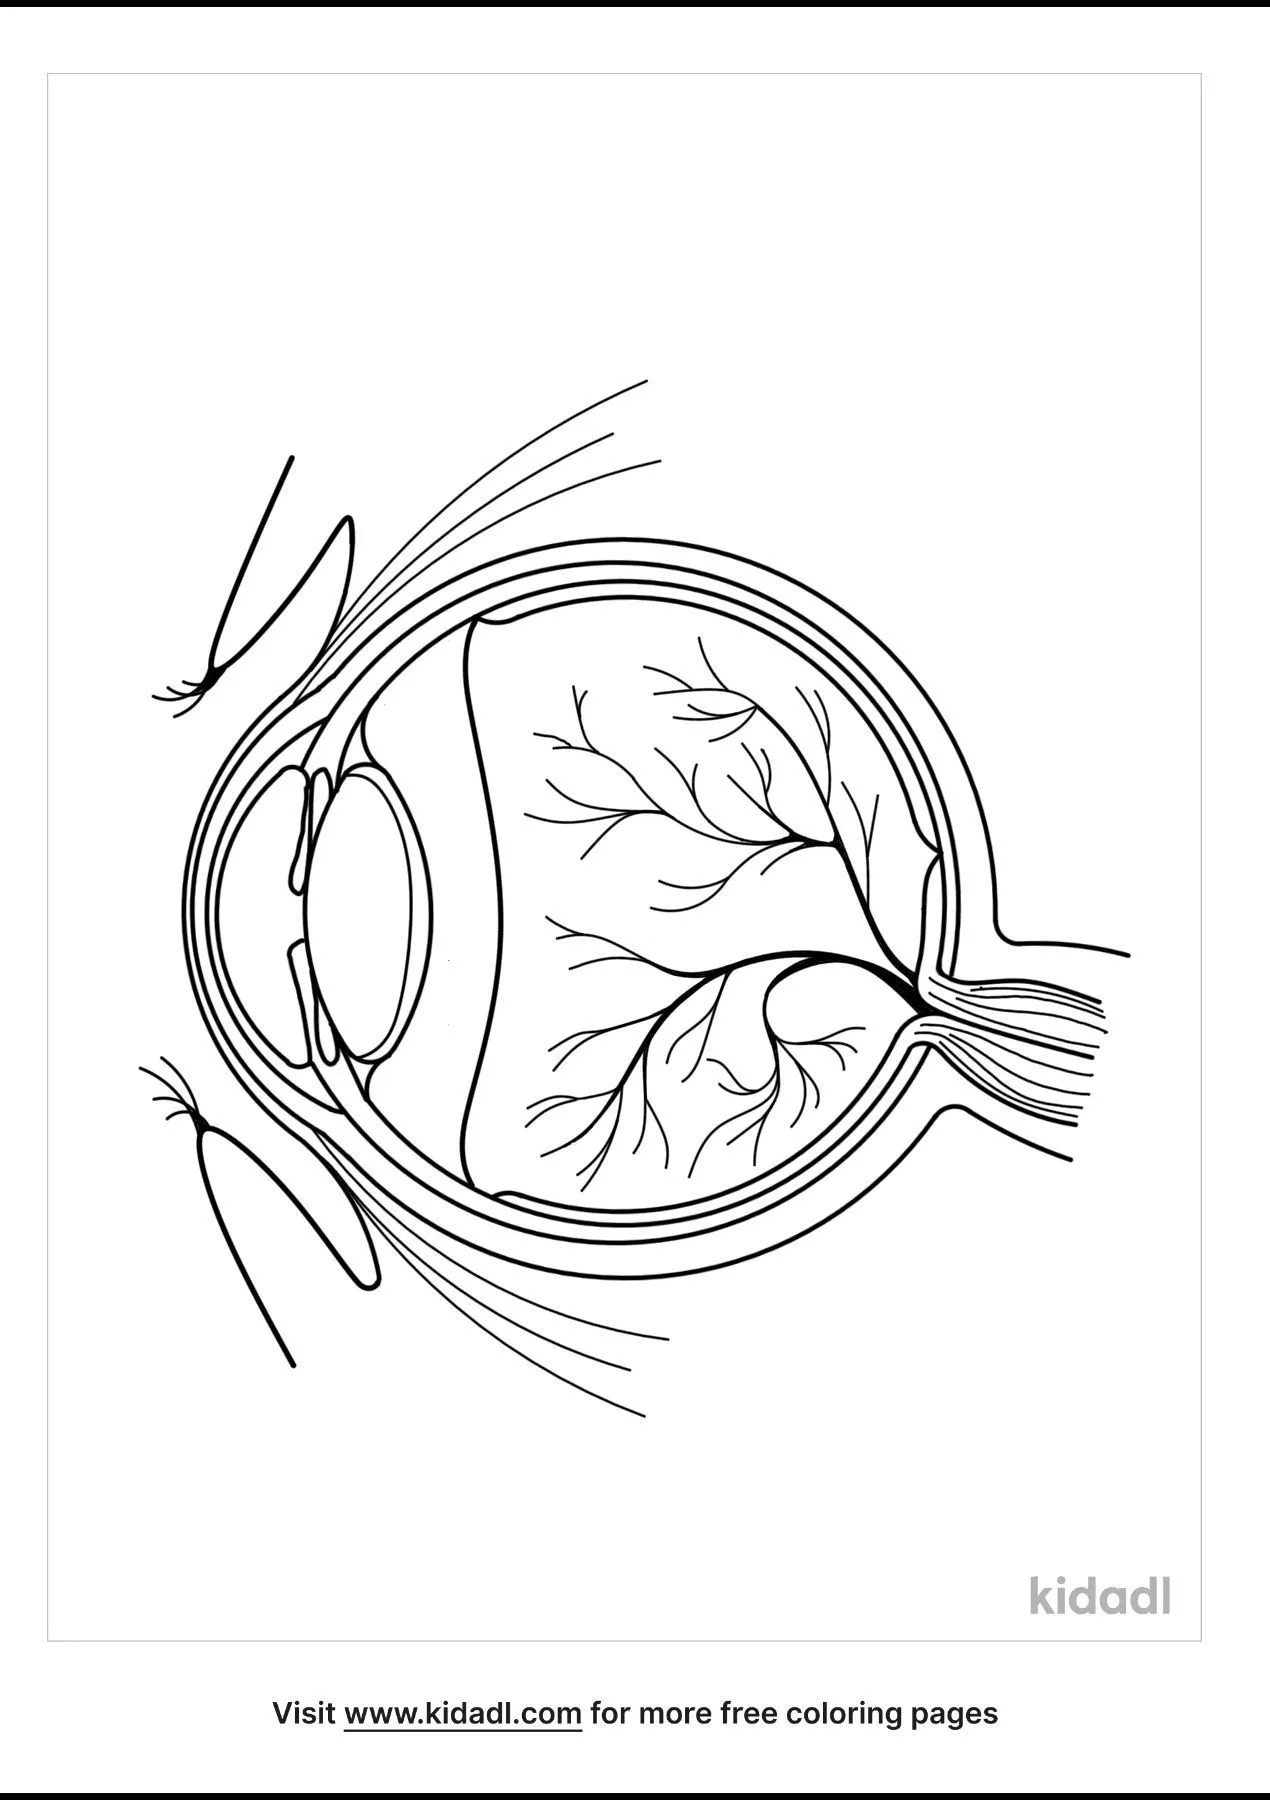 anatomy of the eye coloring pages